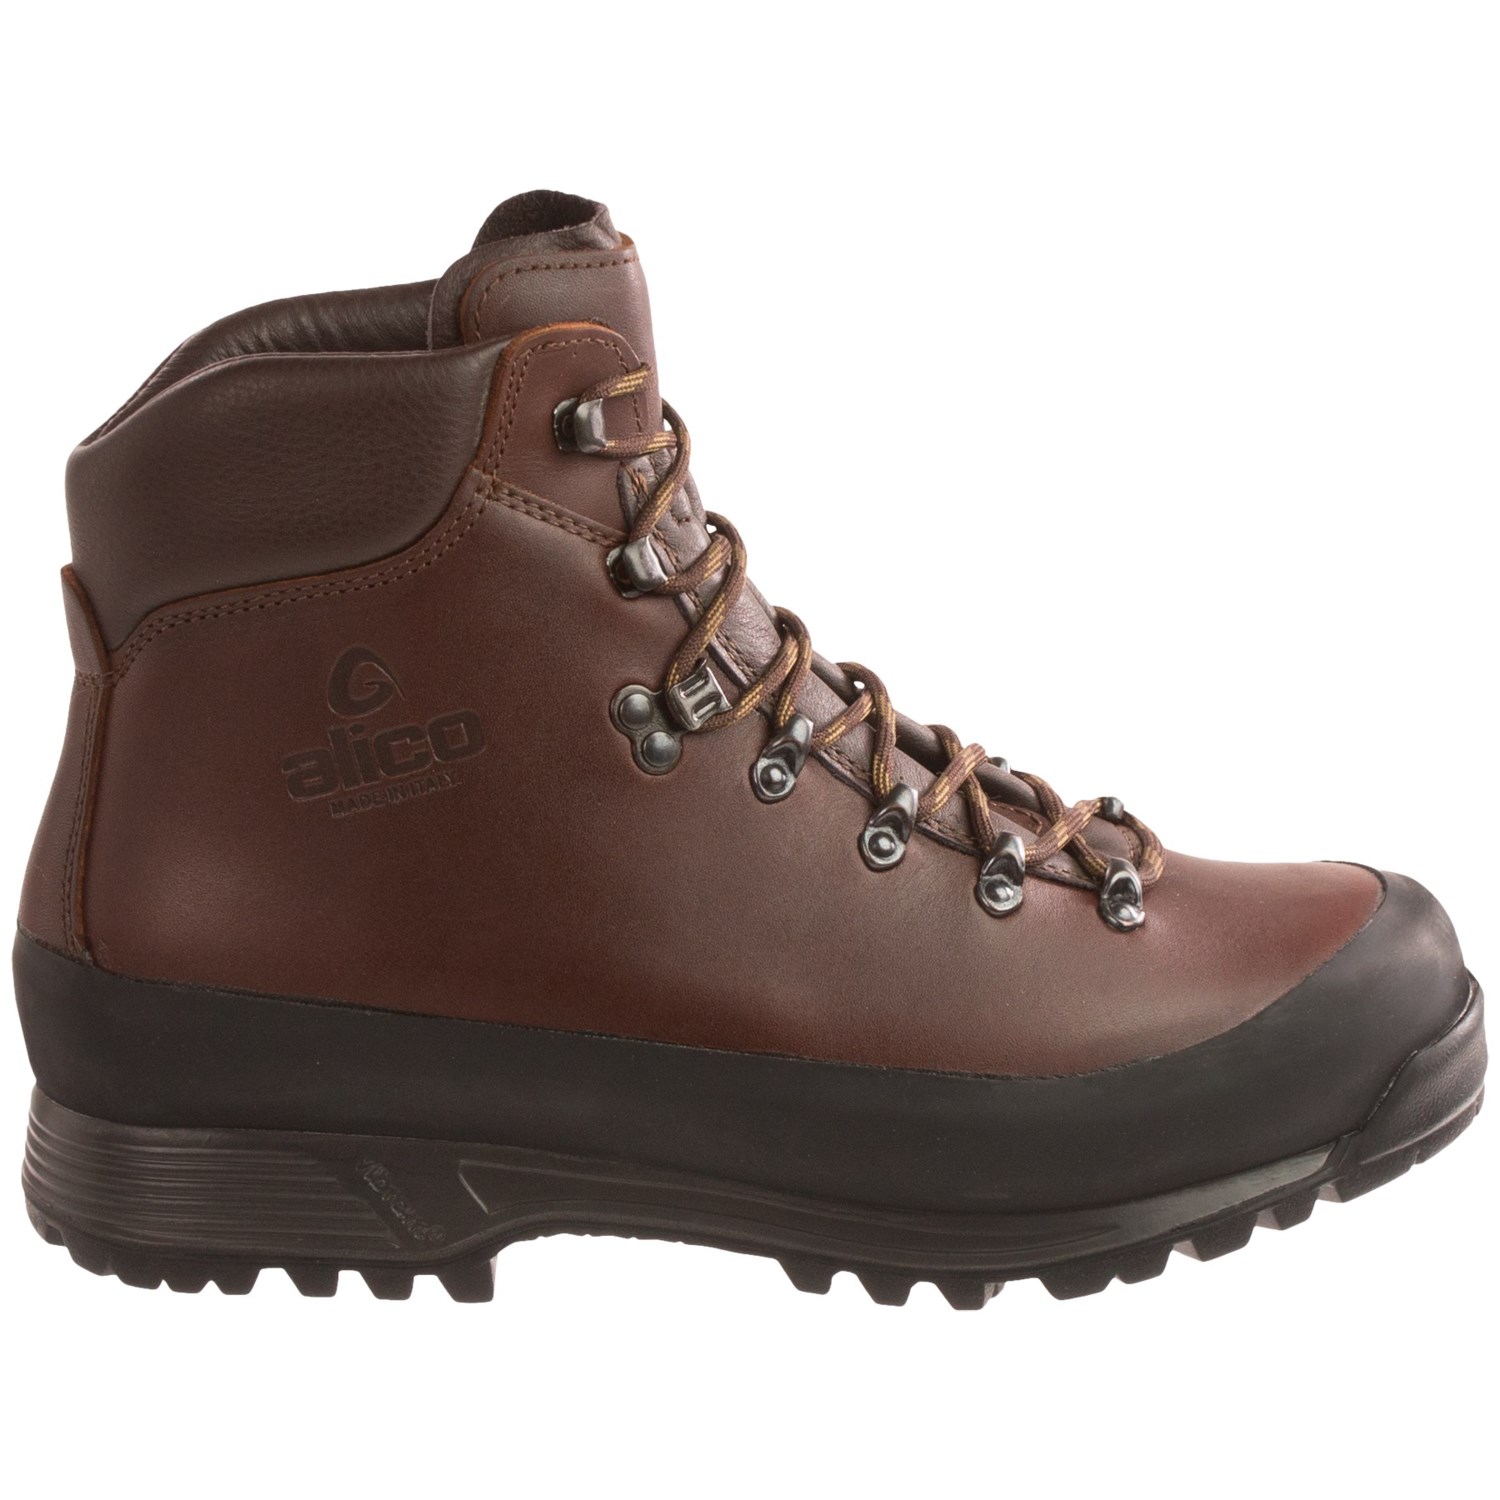 Alico Ultra Hiking Boots (For Men) - Save 62%